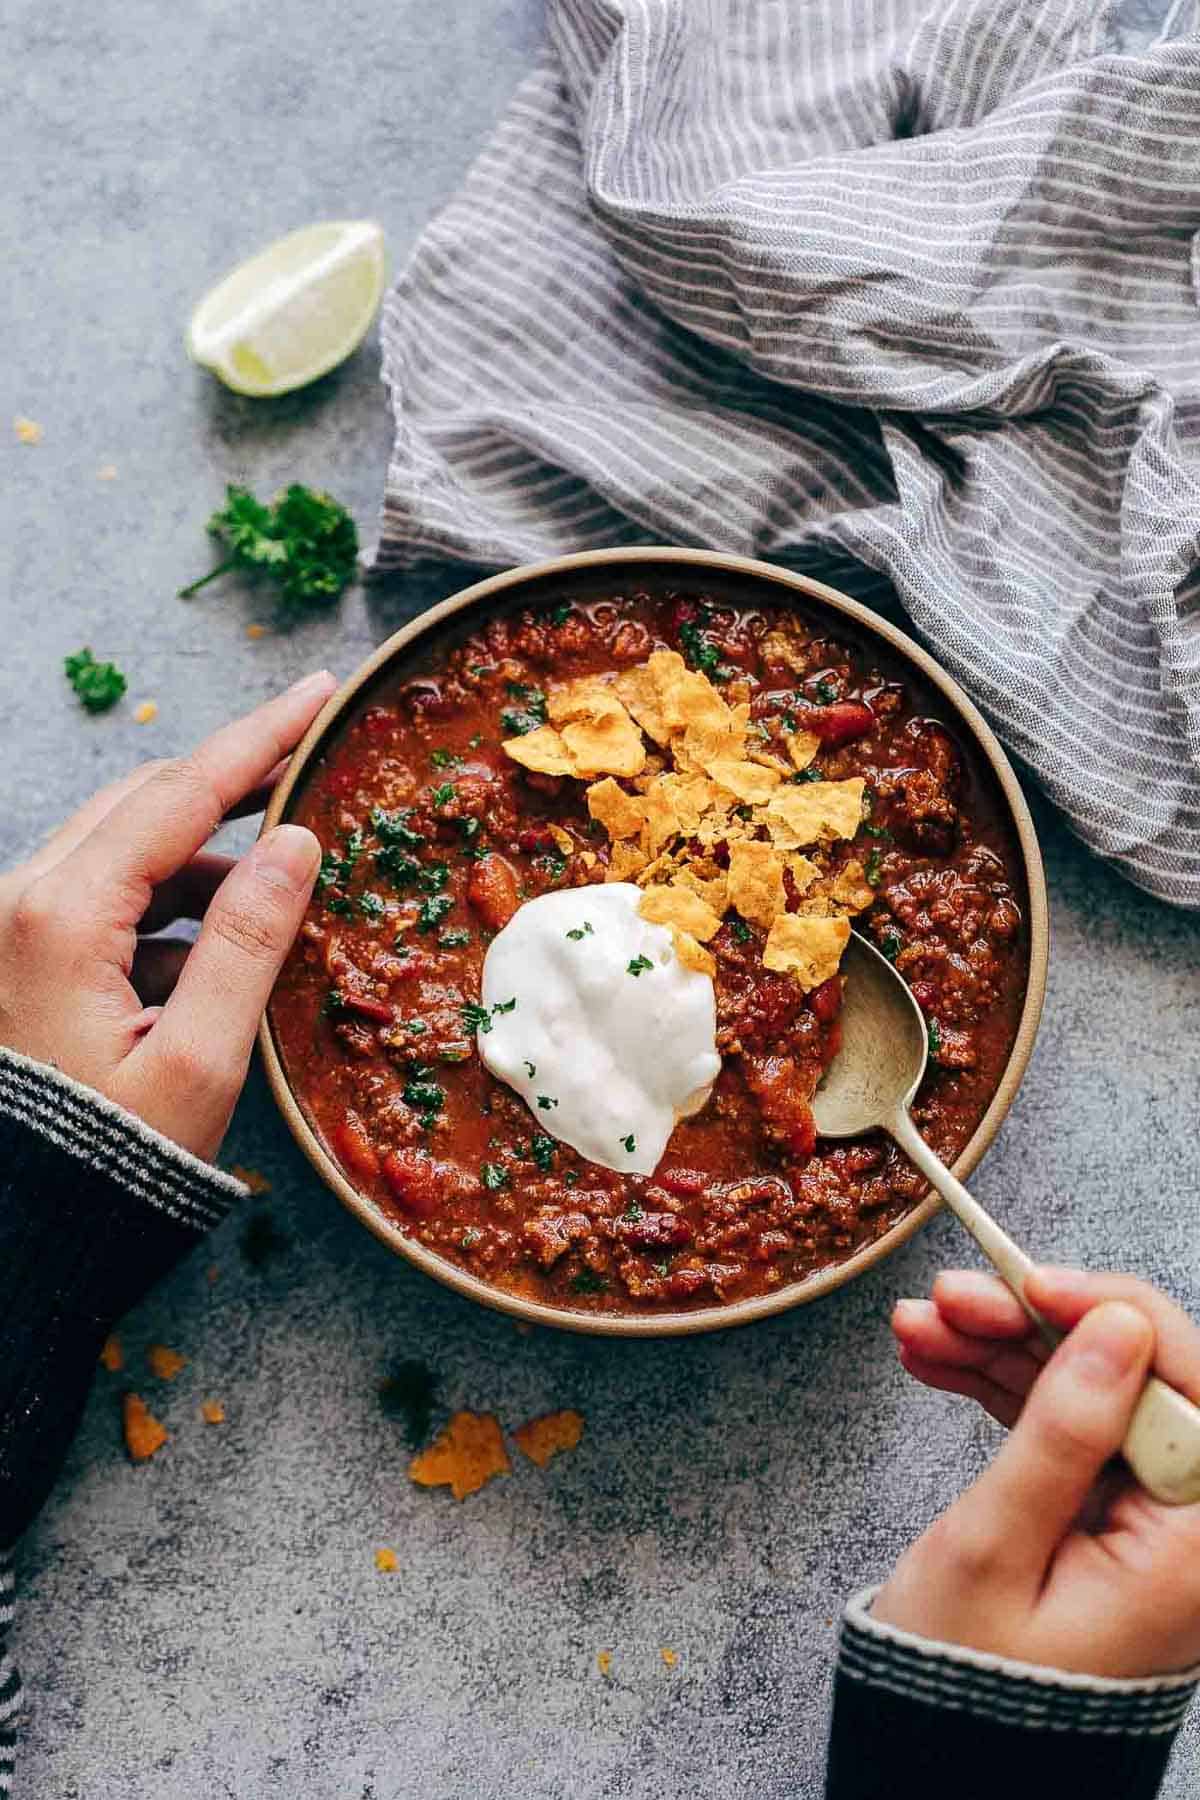 Instant Pot Chipotle Chili is the easiest and fastest way to make chili at home. It's spicy, homemade, comfort food that will keep you warm and makes for a great one pot family dinner. Leftovers taste even better the next day! 